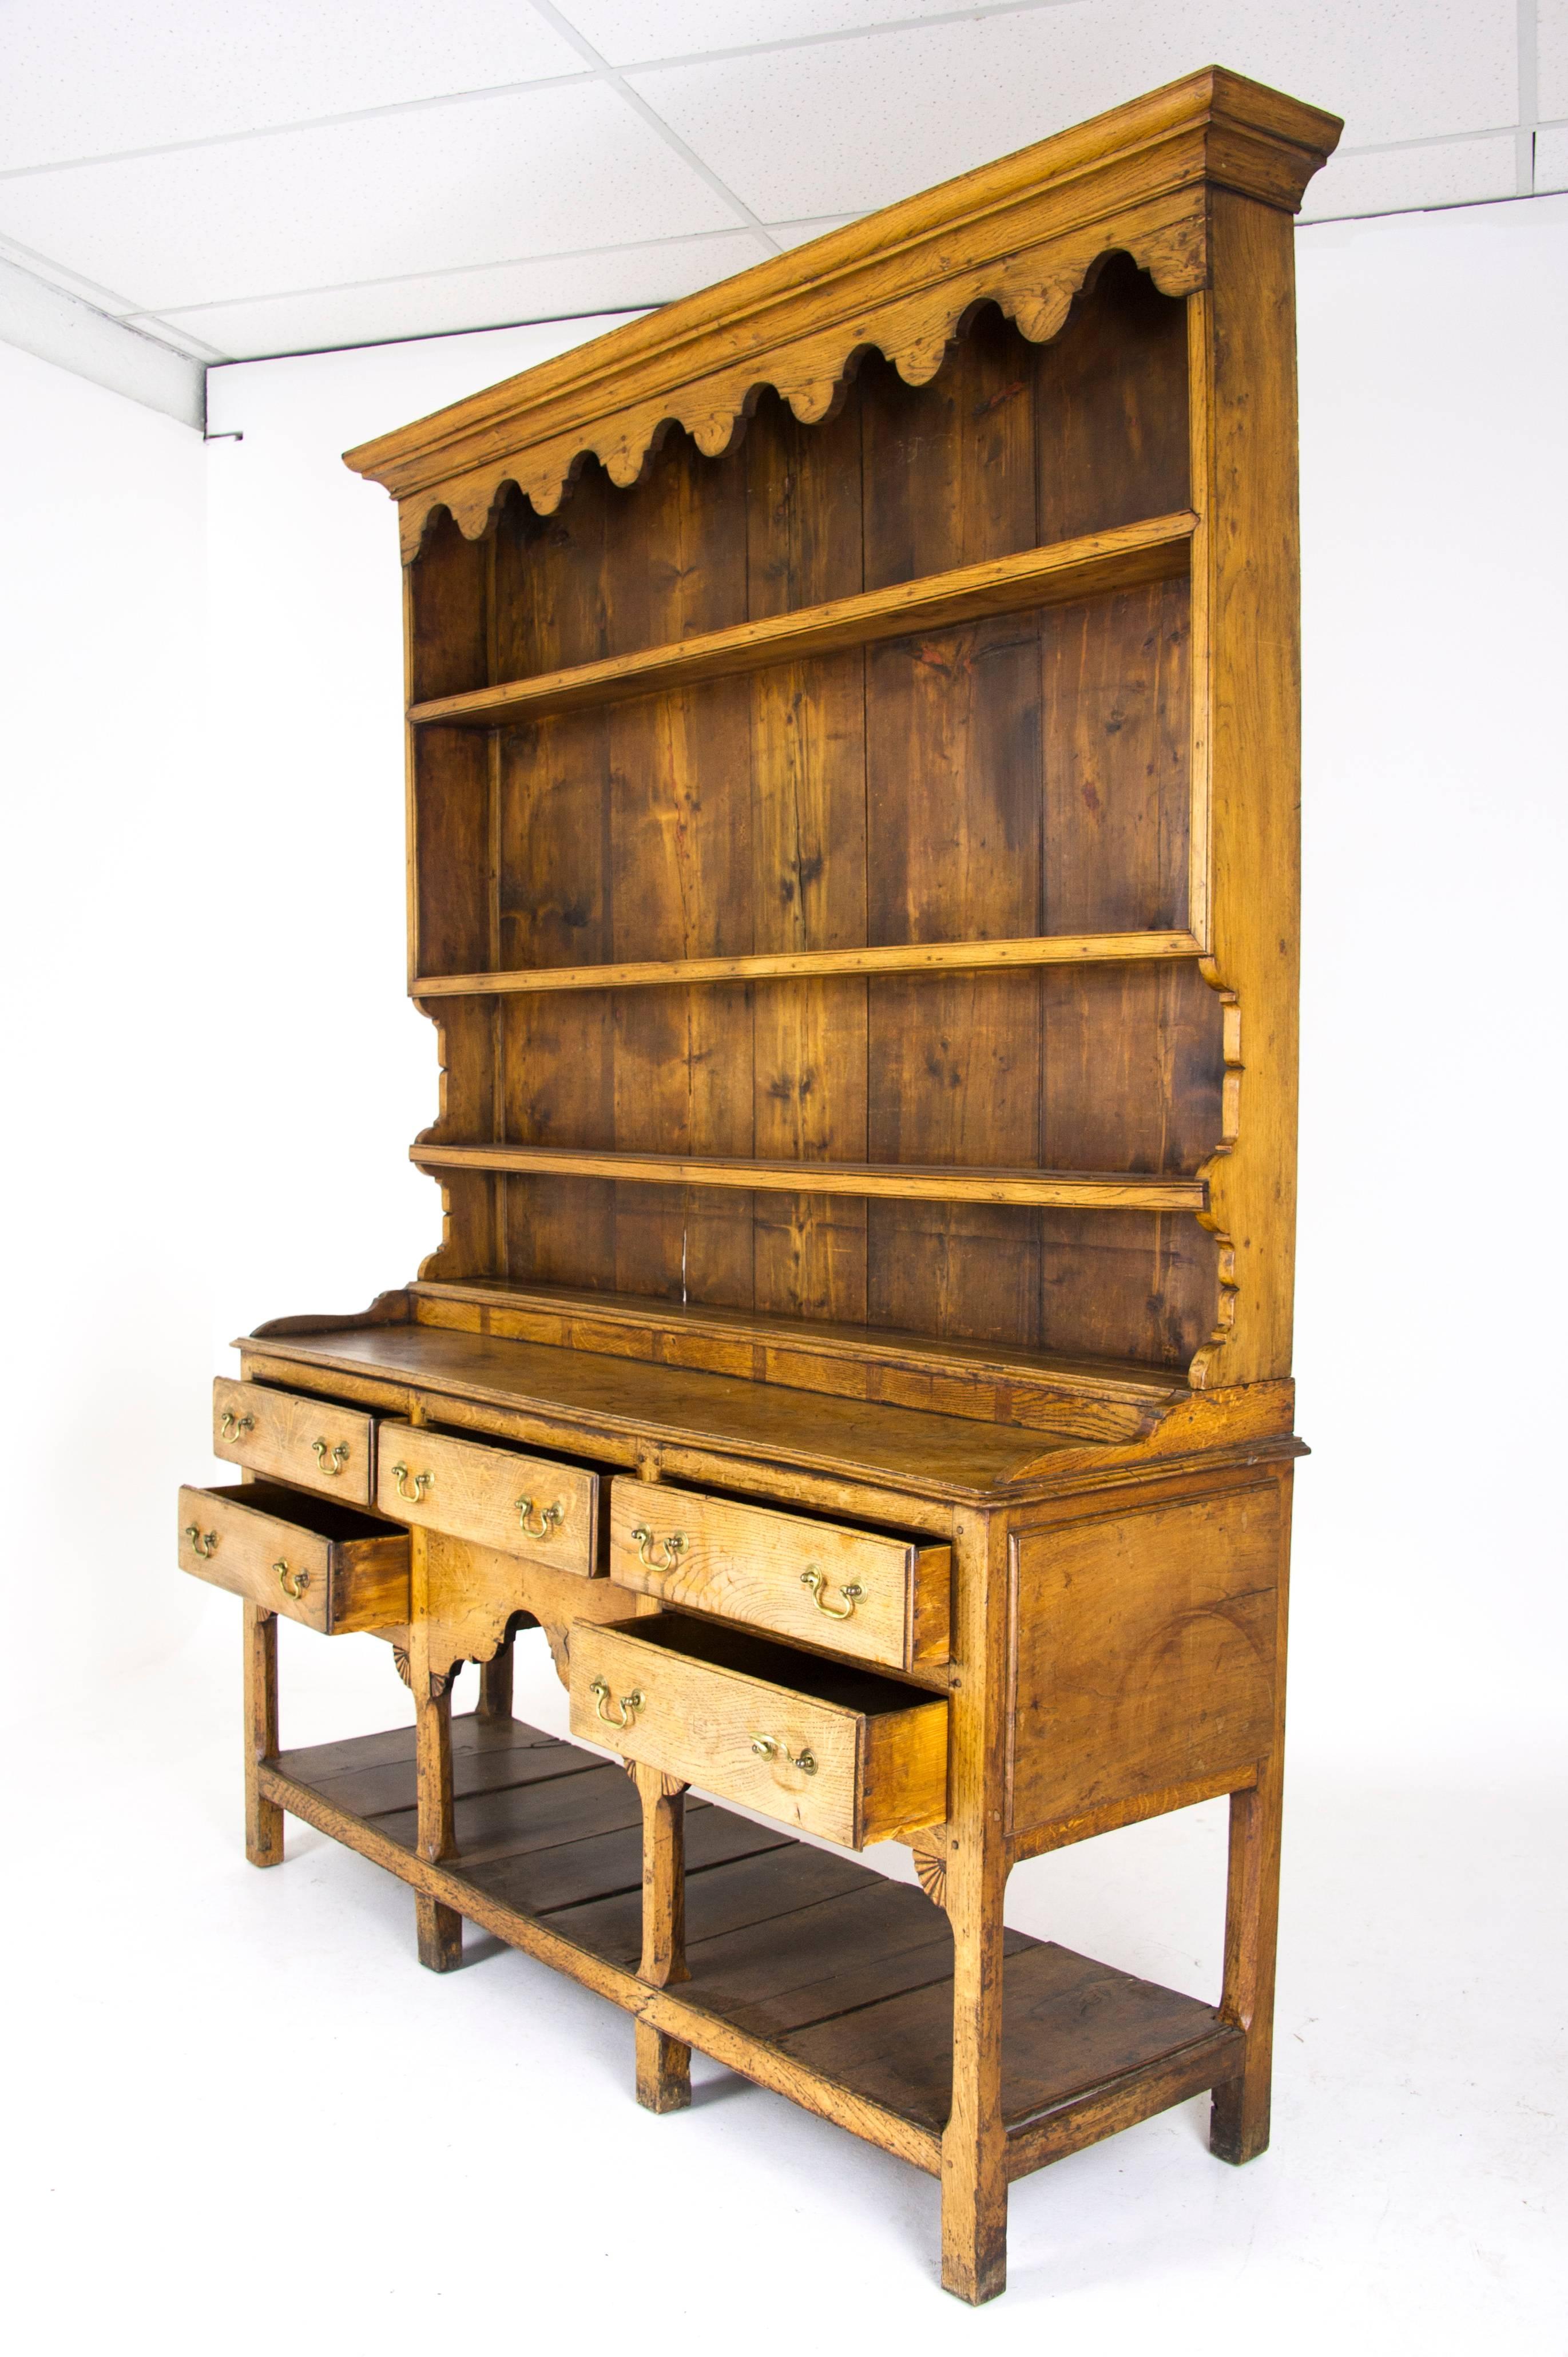 Welsh Dresser, Antique Furniture Sideboard, Antique Welsh Dresser, Solid Oak Sideboard, Scotland 1900, Antique furniture, B925

Scotland, 1850
Solid Oak Construction
Bold Cornice Above
Three Graduated Shelves, Plate Rack Section for displaying